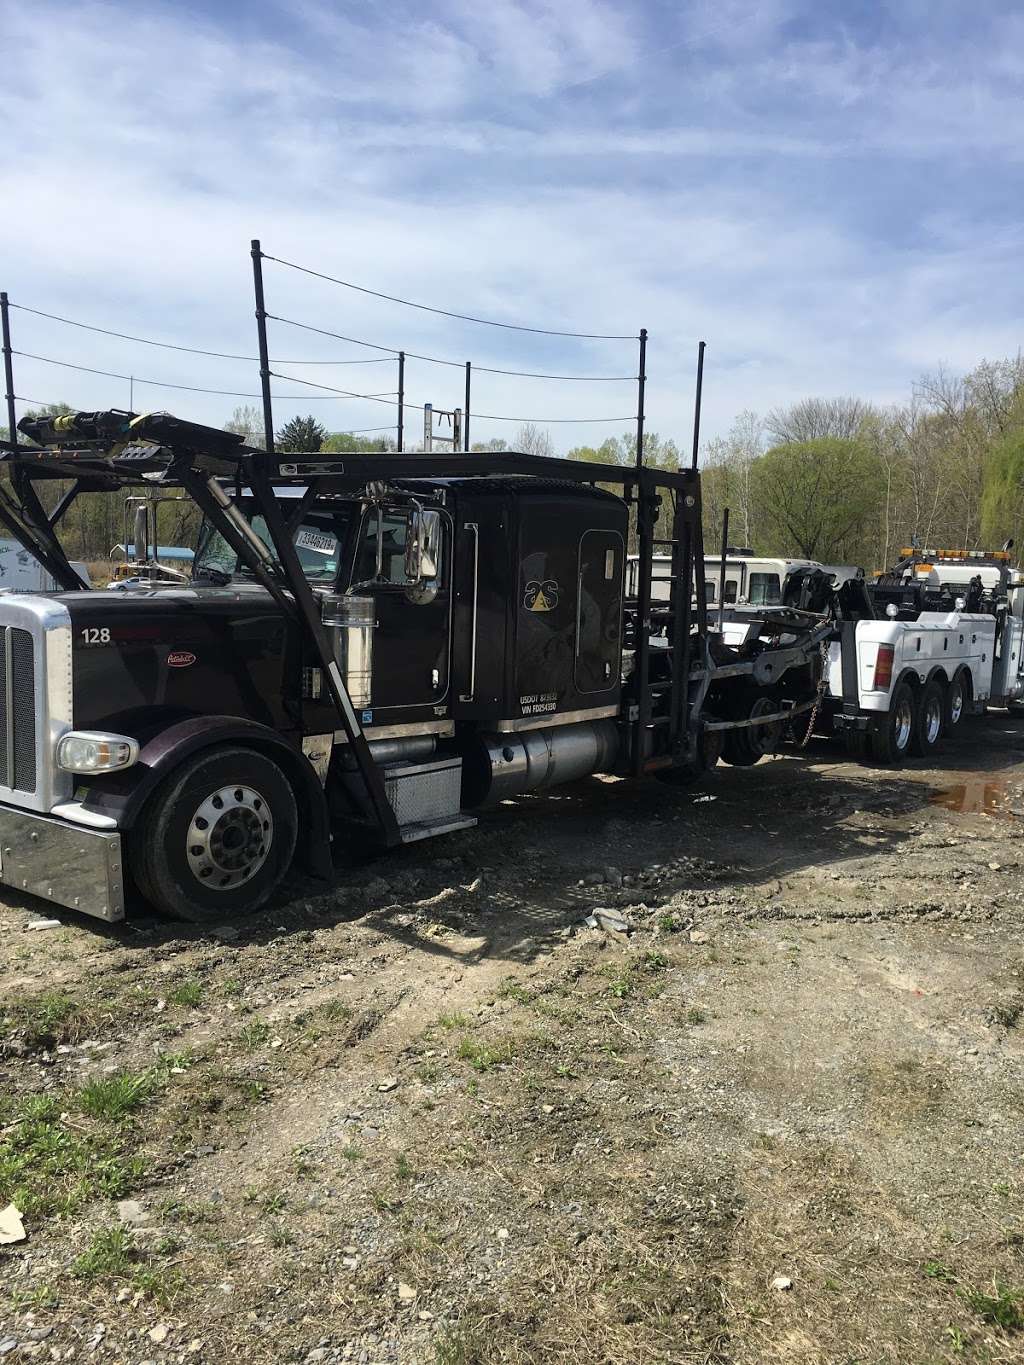 RNR Auto & Towing | 254 Saw Mill River Rd, Yonkers, NY 10701, USA | Phone: (914) 423-0678